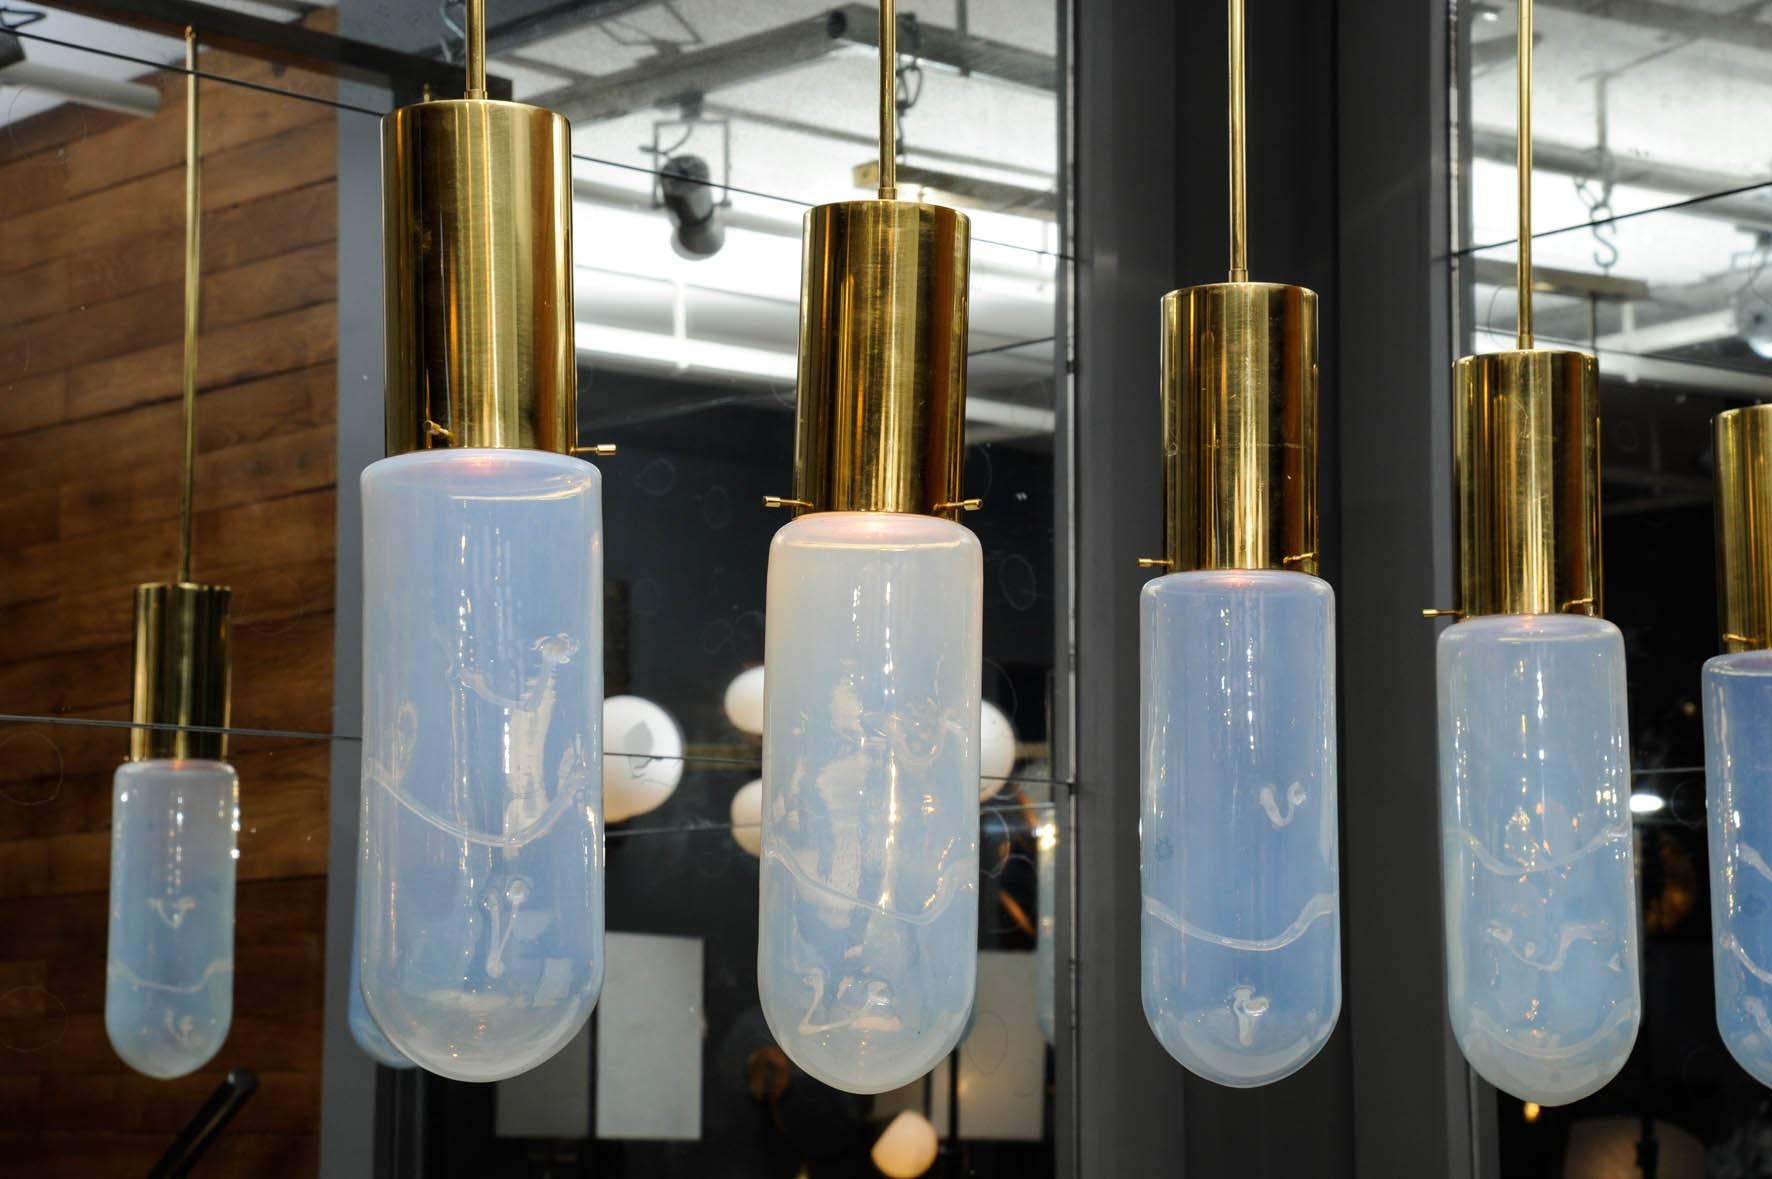 Leucos suspension my of a brass structure and five pendants end by a tinted glass piece.